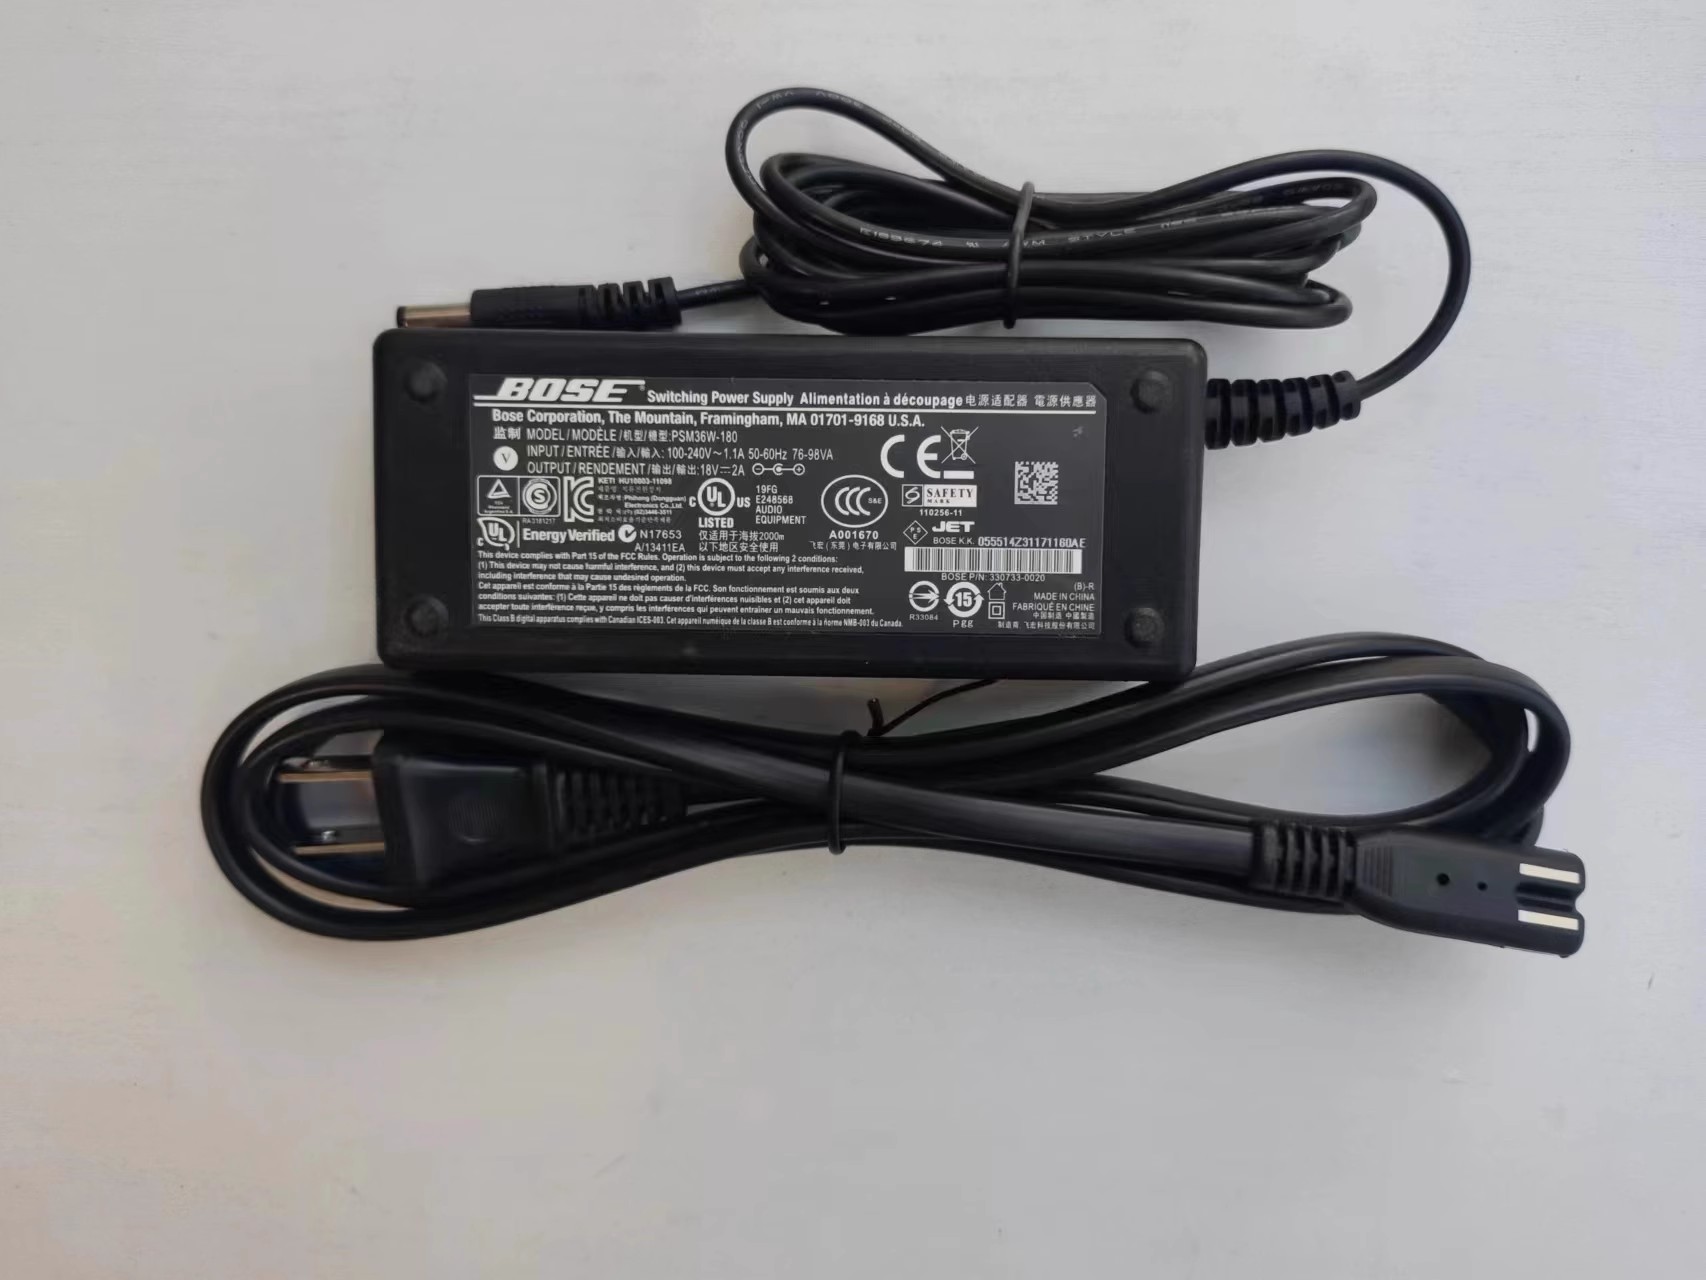 *Brand NEW*18V 2A AC/DC AC ADAPTER BOSE PSM36W-180 POWER Supply